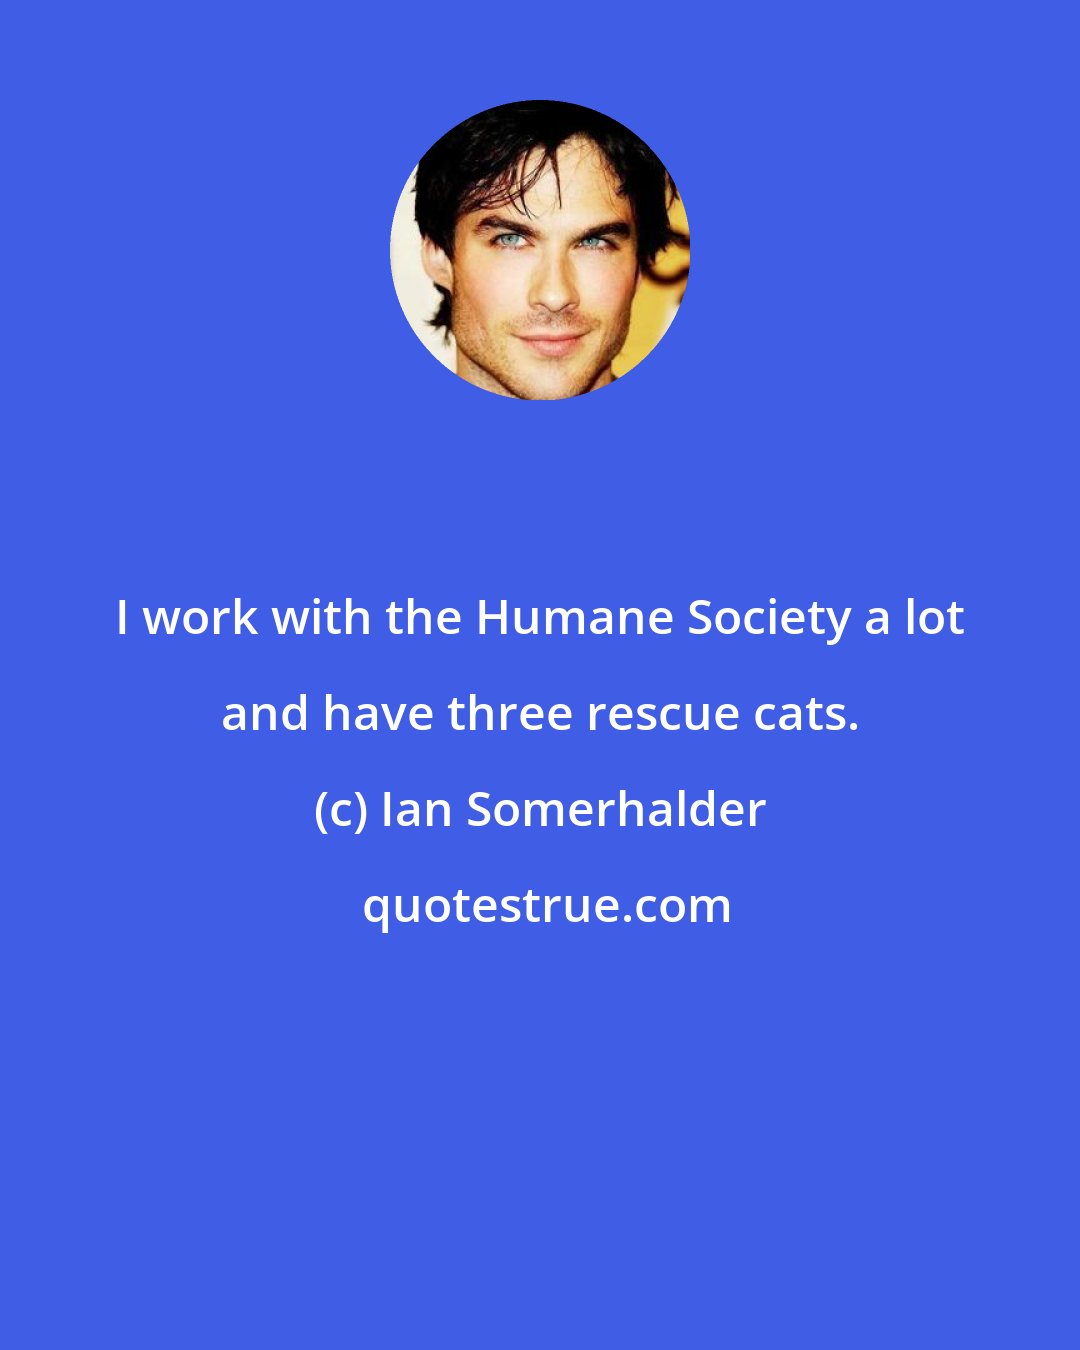 Ian Somerhalder: I work with the Humane Society a lot and have three rescue cats.